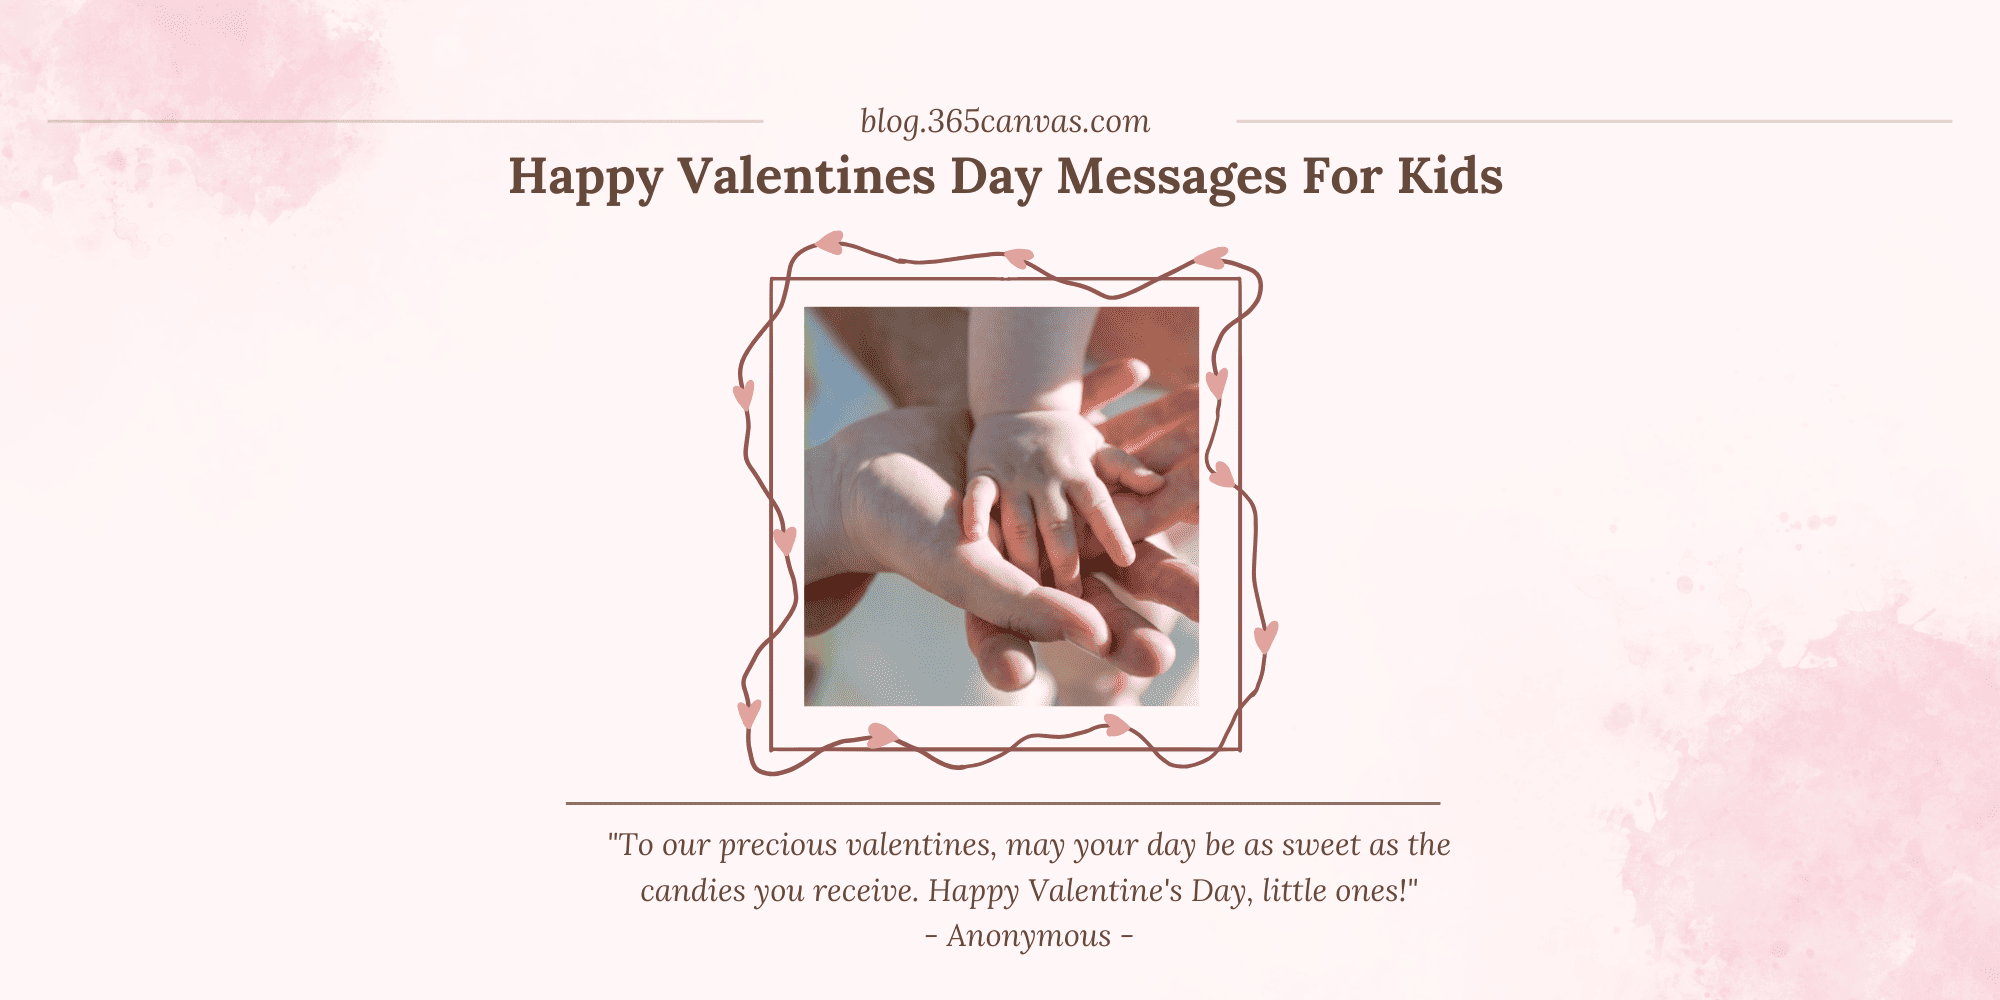 60 Adorable &Affectionate Valentine’s Day Messages for Kids